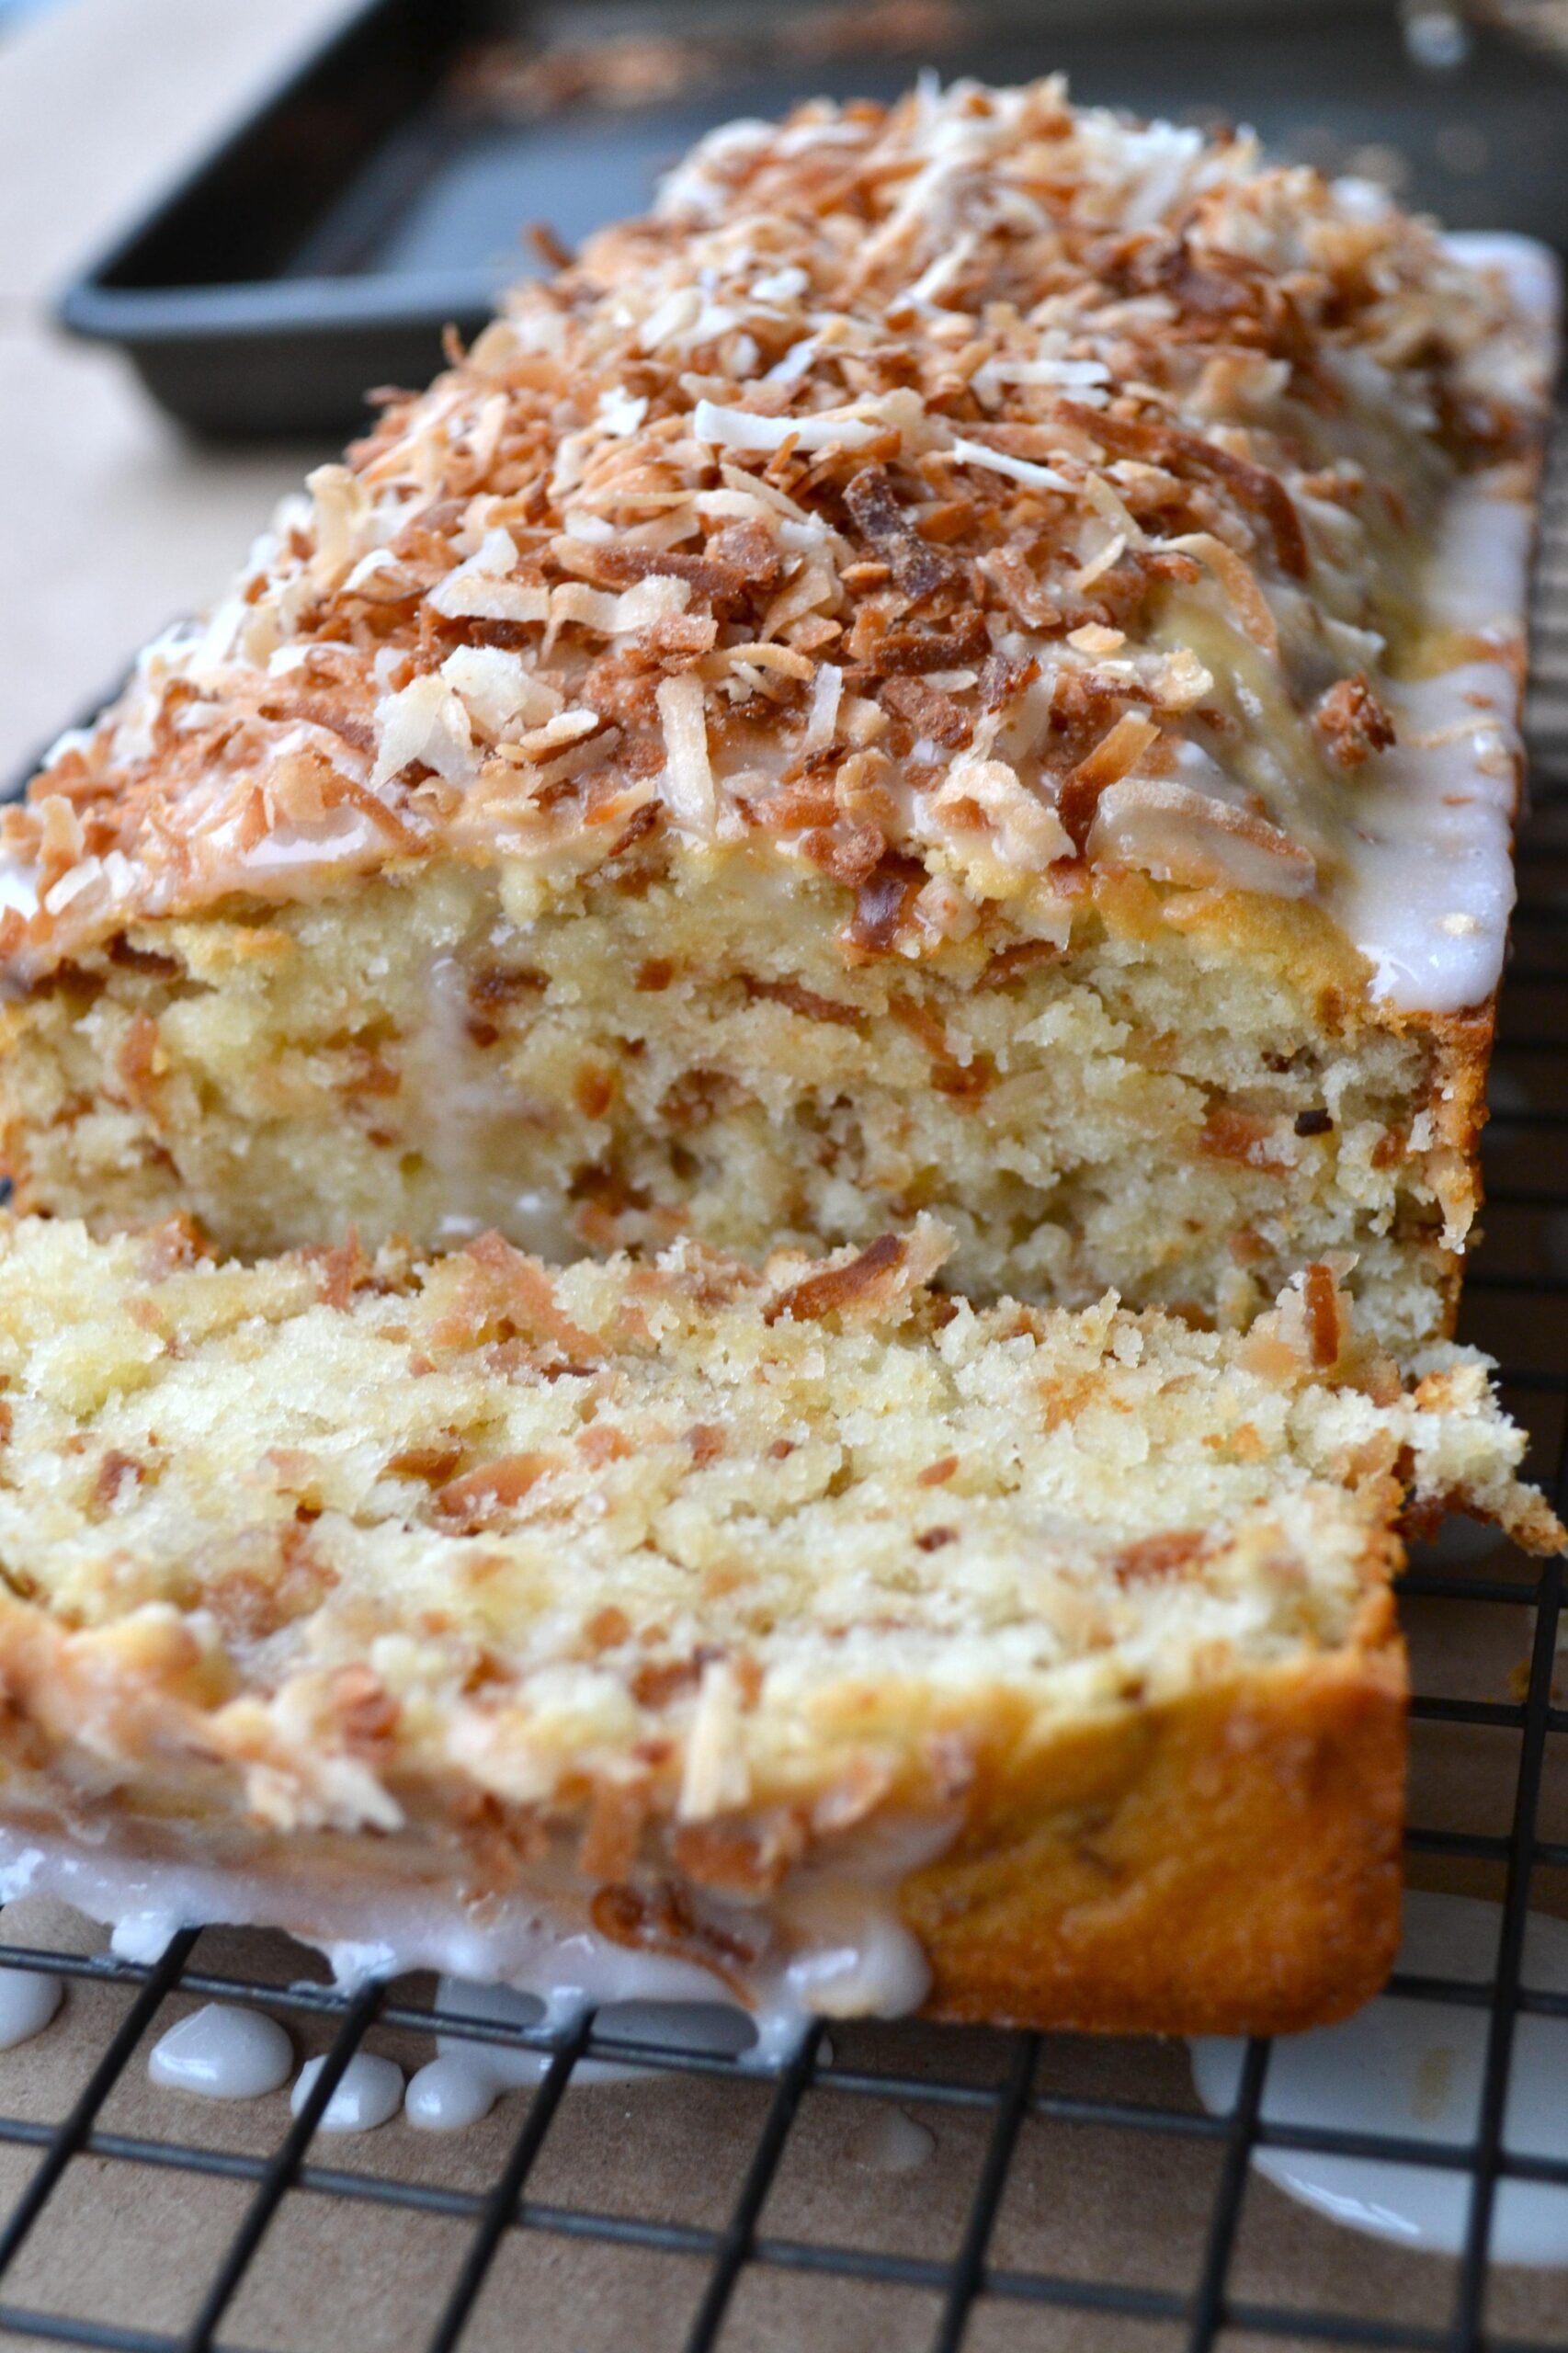 Sure, here are 11 unique photo captions for the Toasted Coconut Pound Cake recipe: